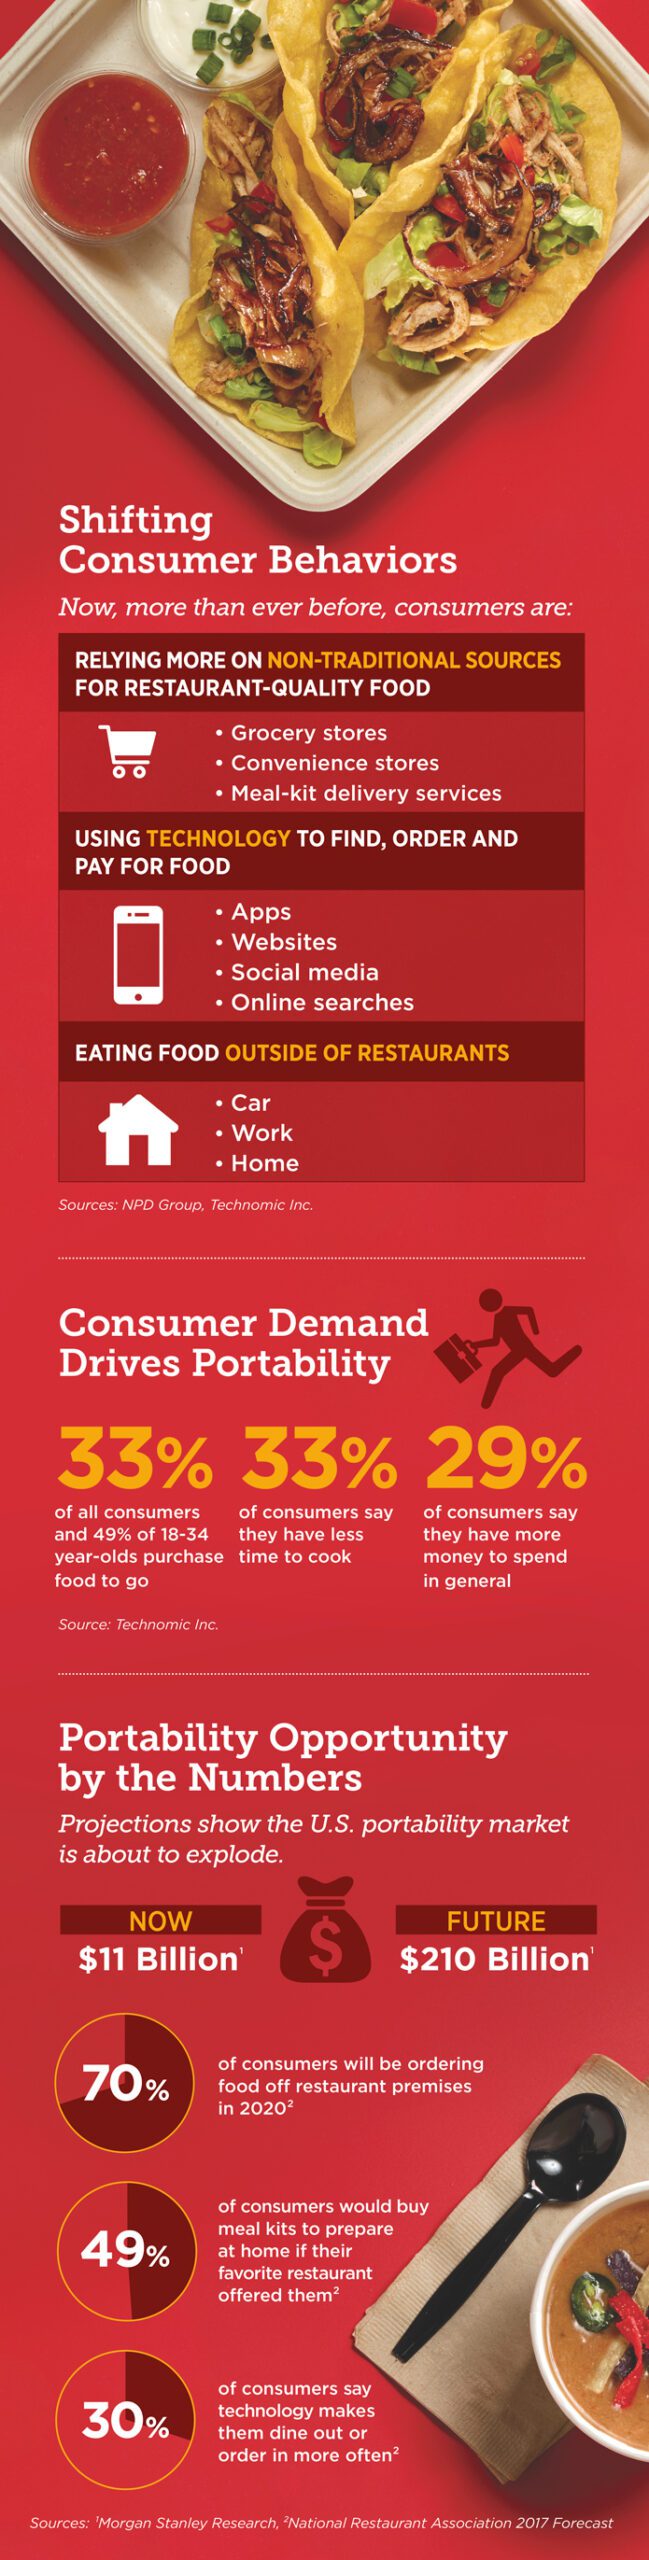 Infographic: Portability Opportunity for Restaurants